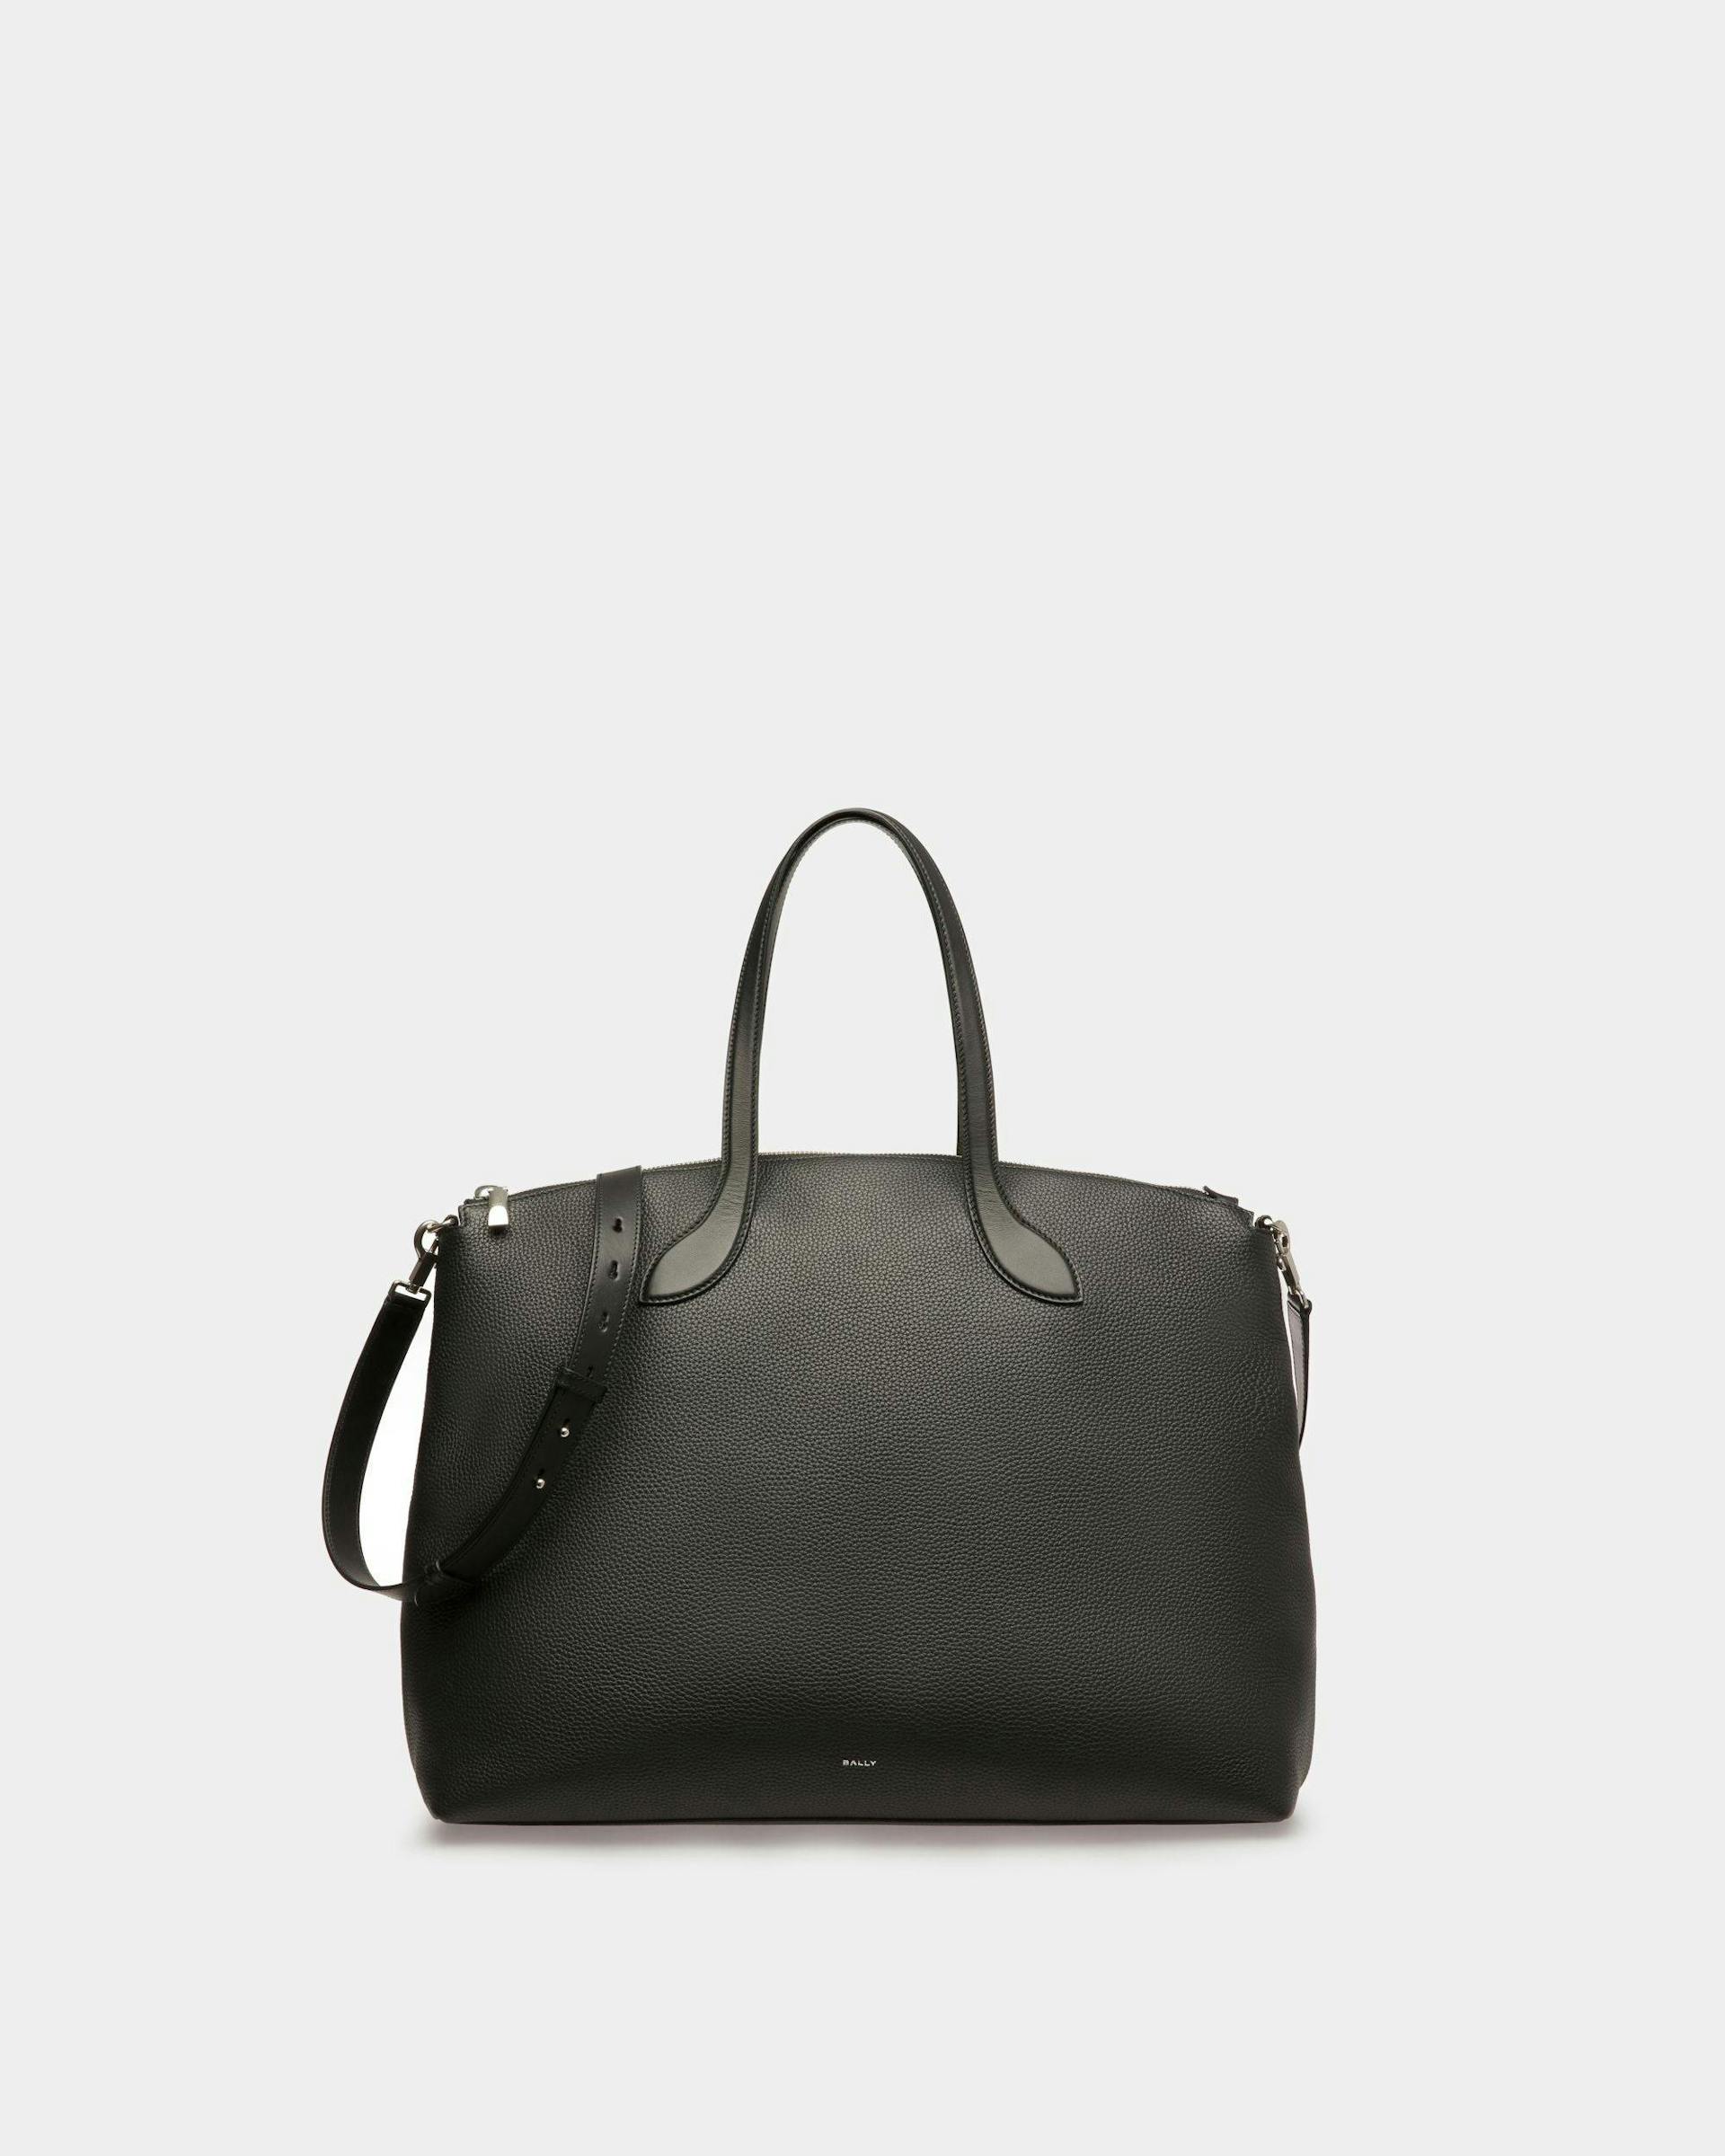 Men's Lago Tote Bag In Black Leather | Bally | Still Life Front